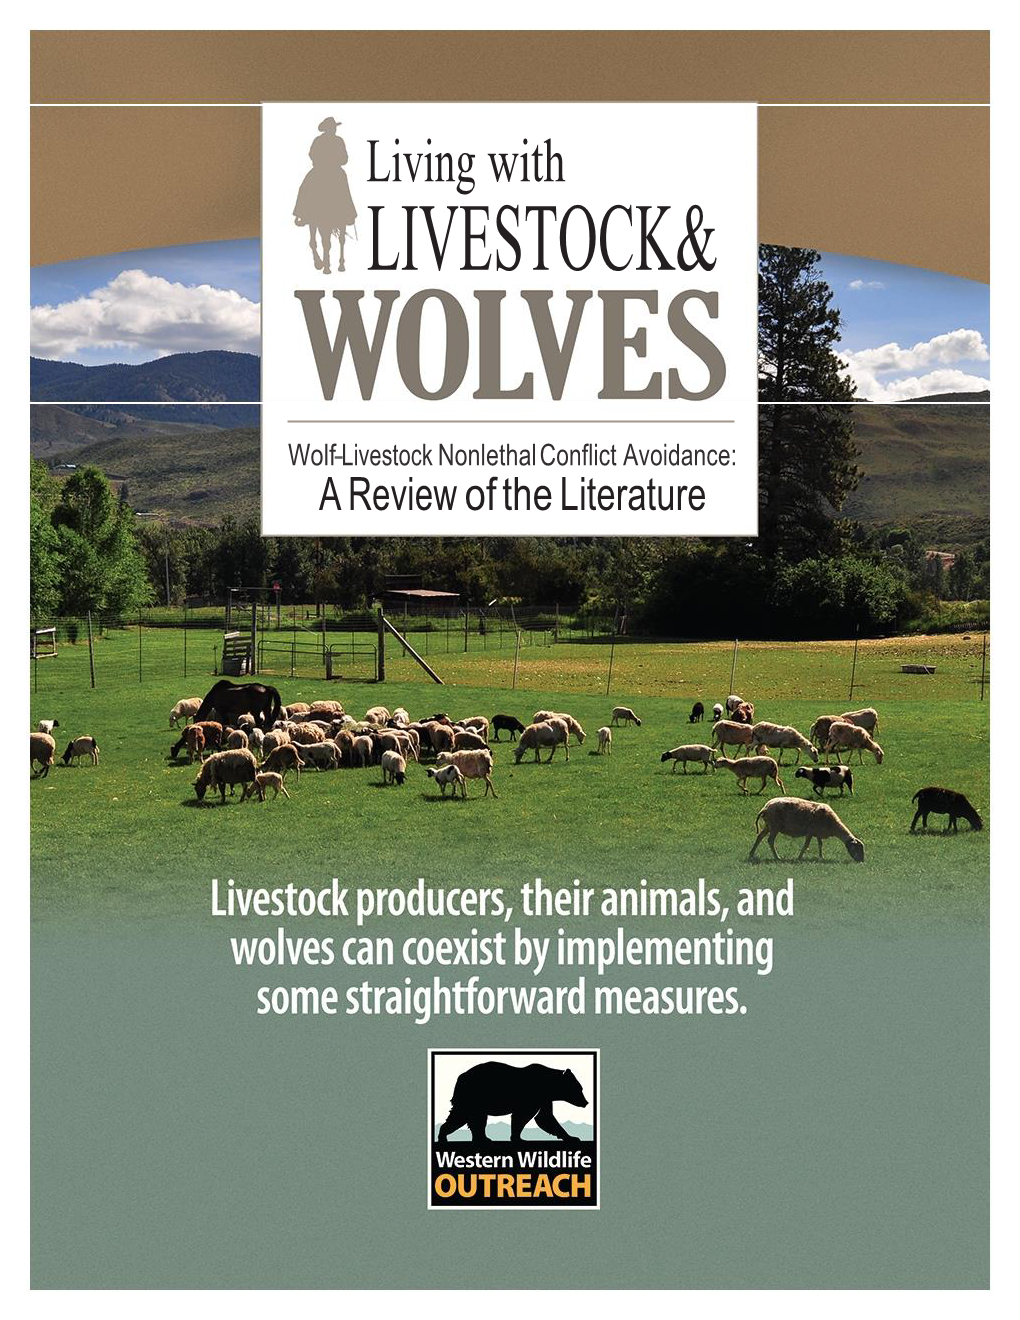 Wolf-Livestock Nonlethal Conflict Avoidance: a Review of the Literature